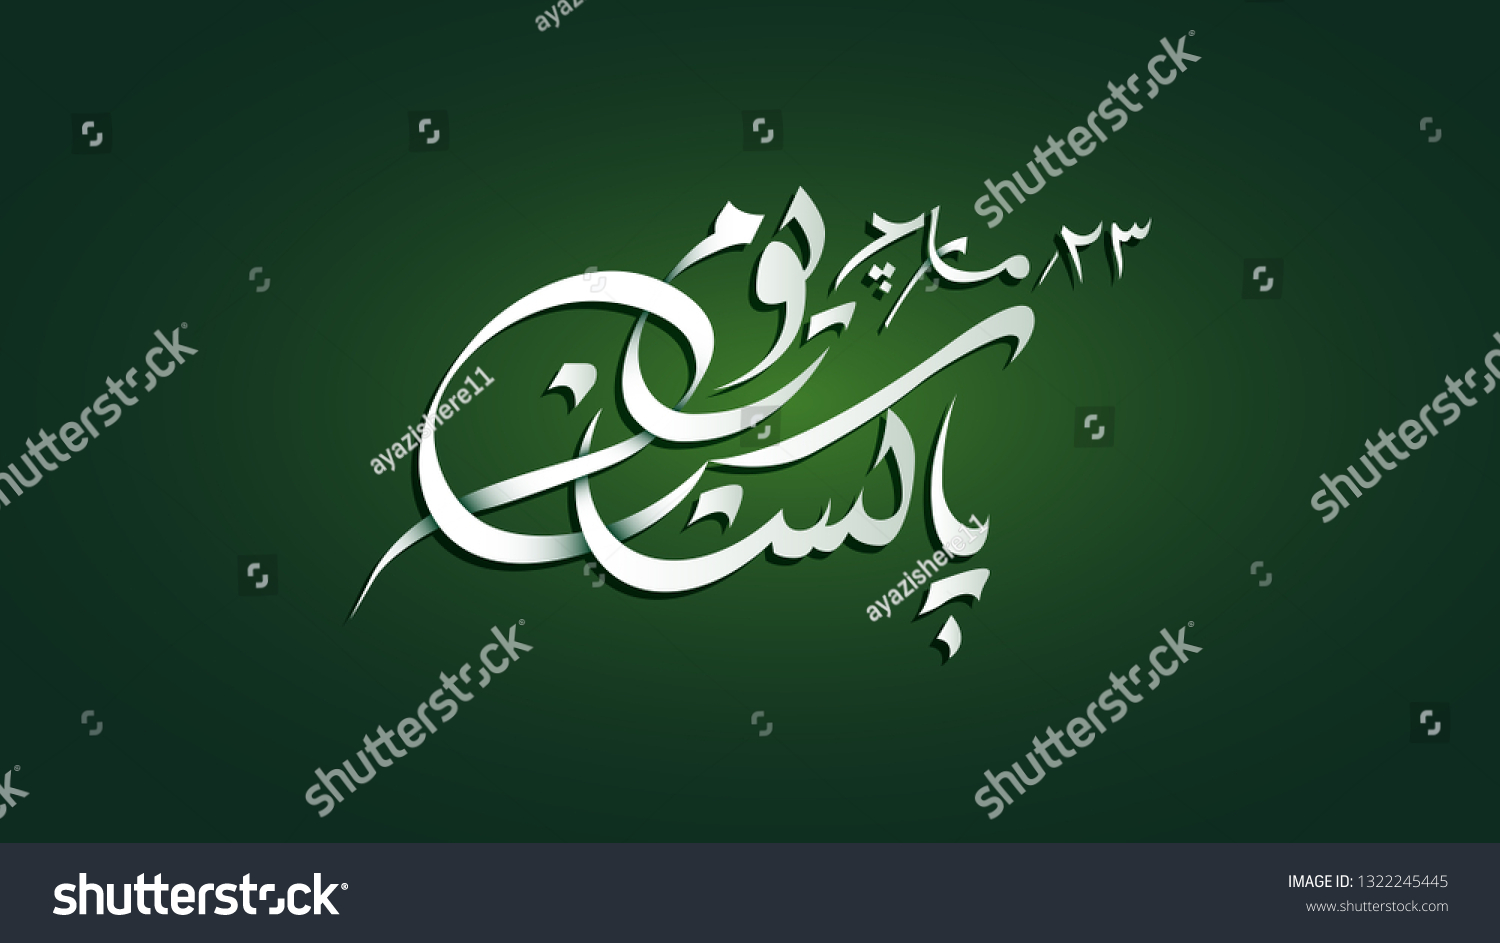 23rd March Pakistan Day Urdu Calligraphy Stock Vector Royalty